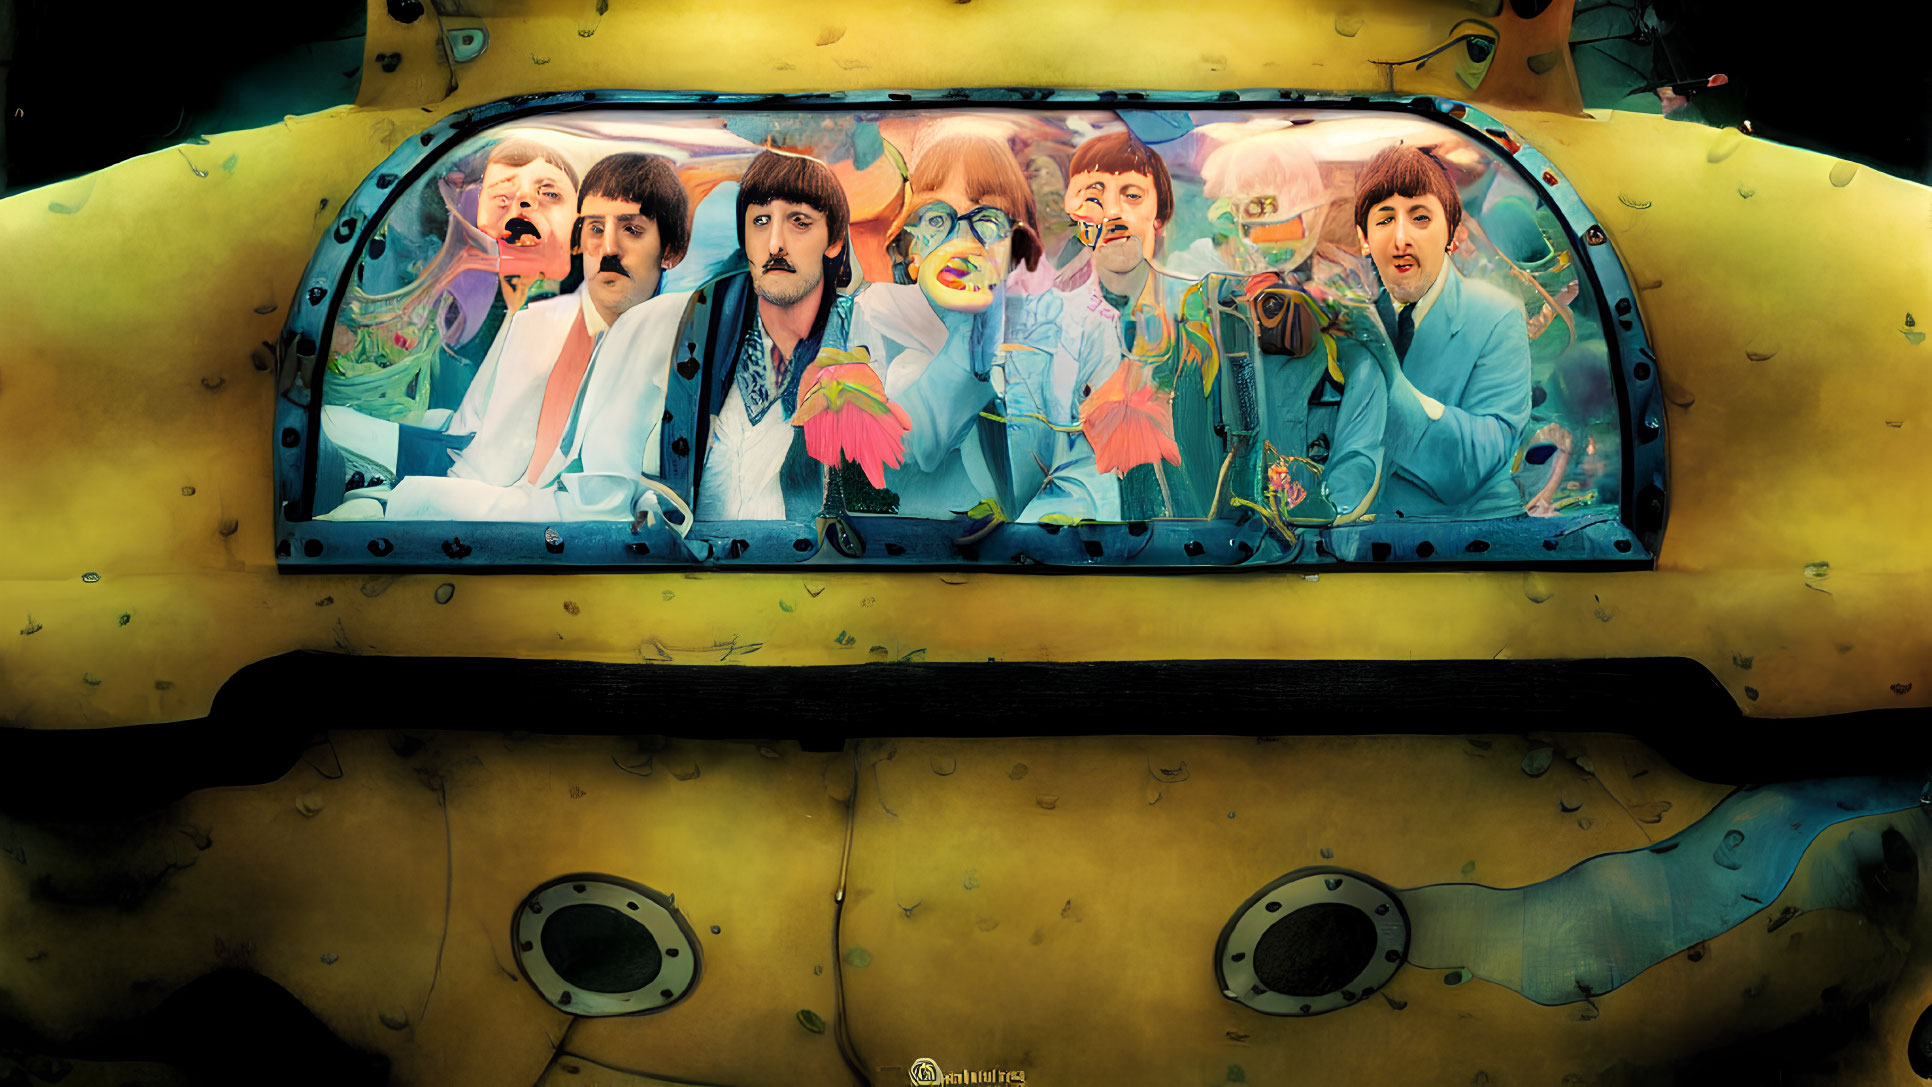 Colorful illustration of animated band characters in submarine-shaped vehicle